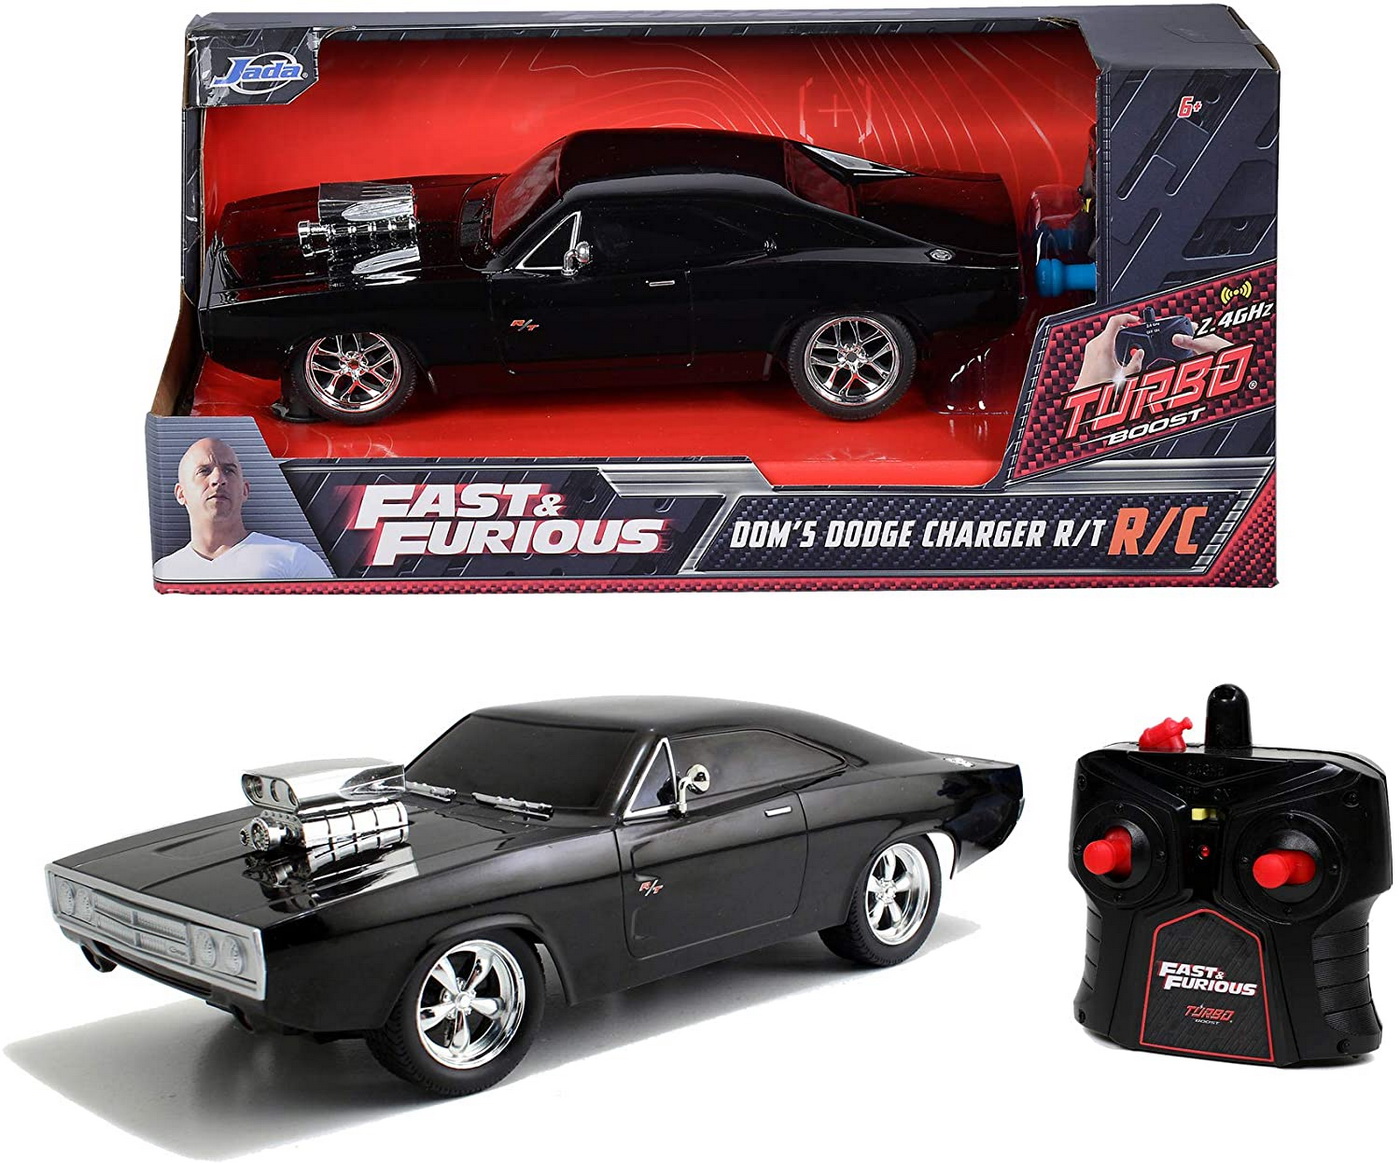 Fast&furious Rc 1970 Dodge Charger 1:24